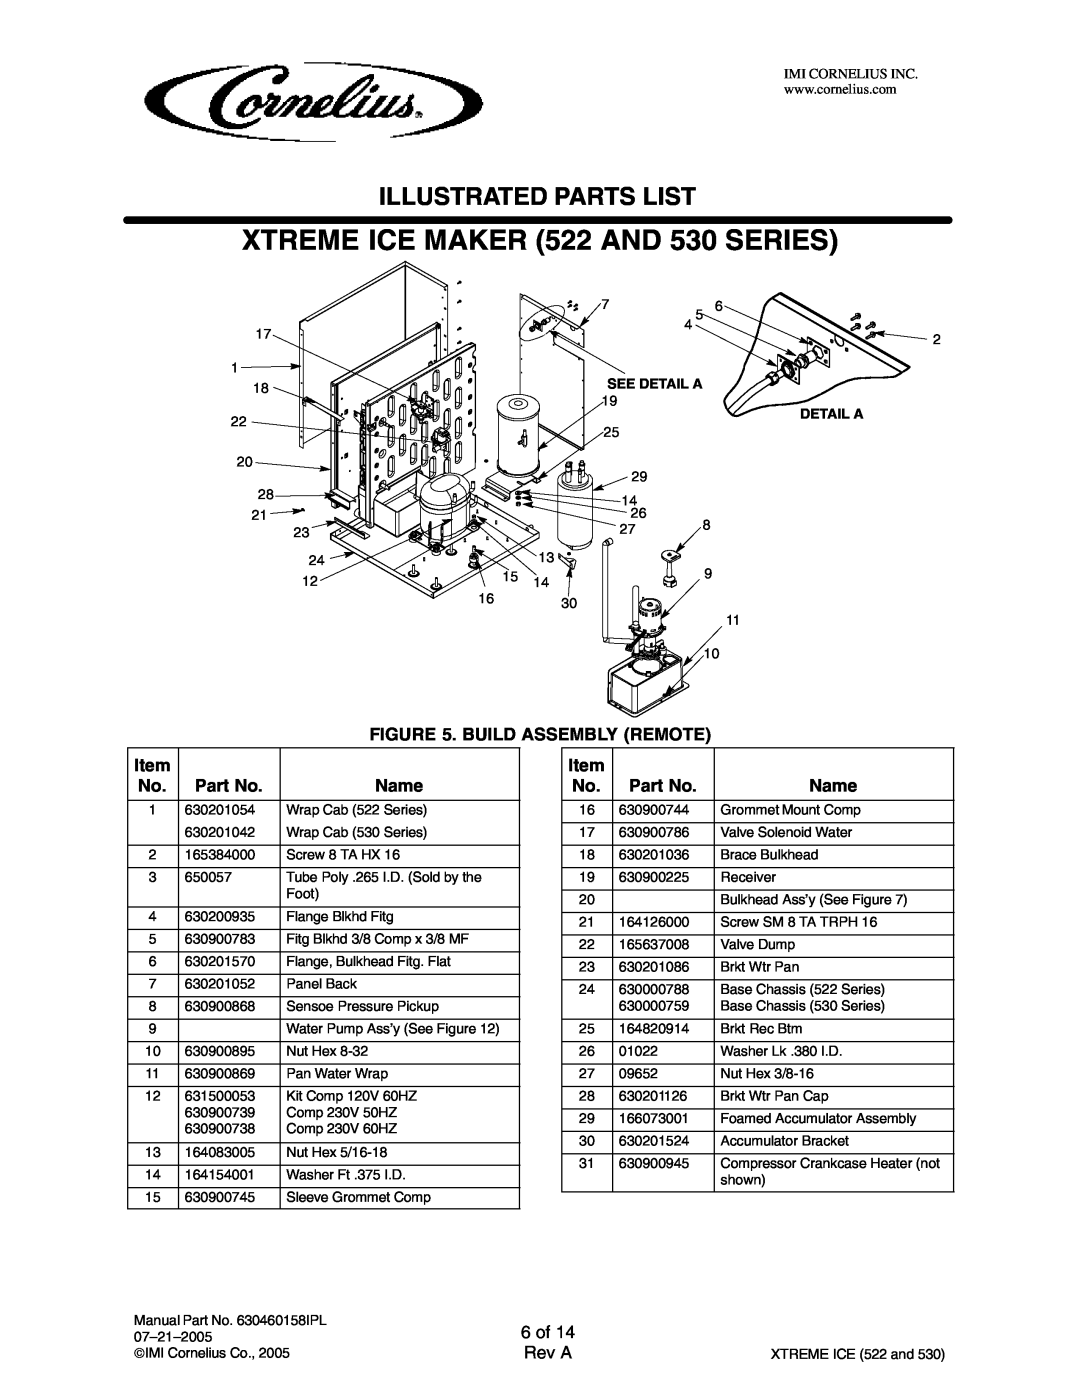 Cornelius 631805020 Build Assembly Remote, 6 of, XTREME ICE MAKER 522 AND 530 SERIES, Illustrated Parts List, Name, Rev A 